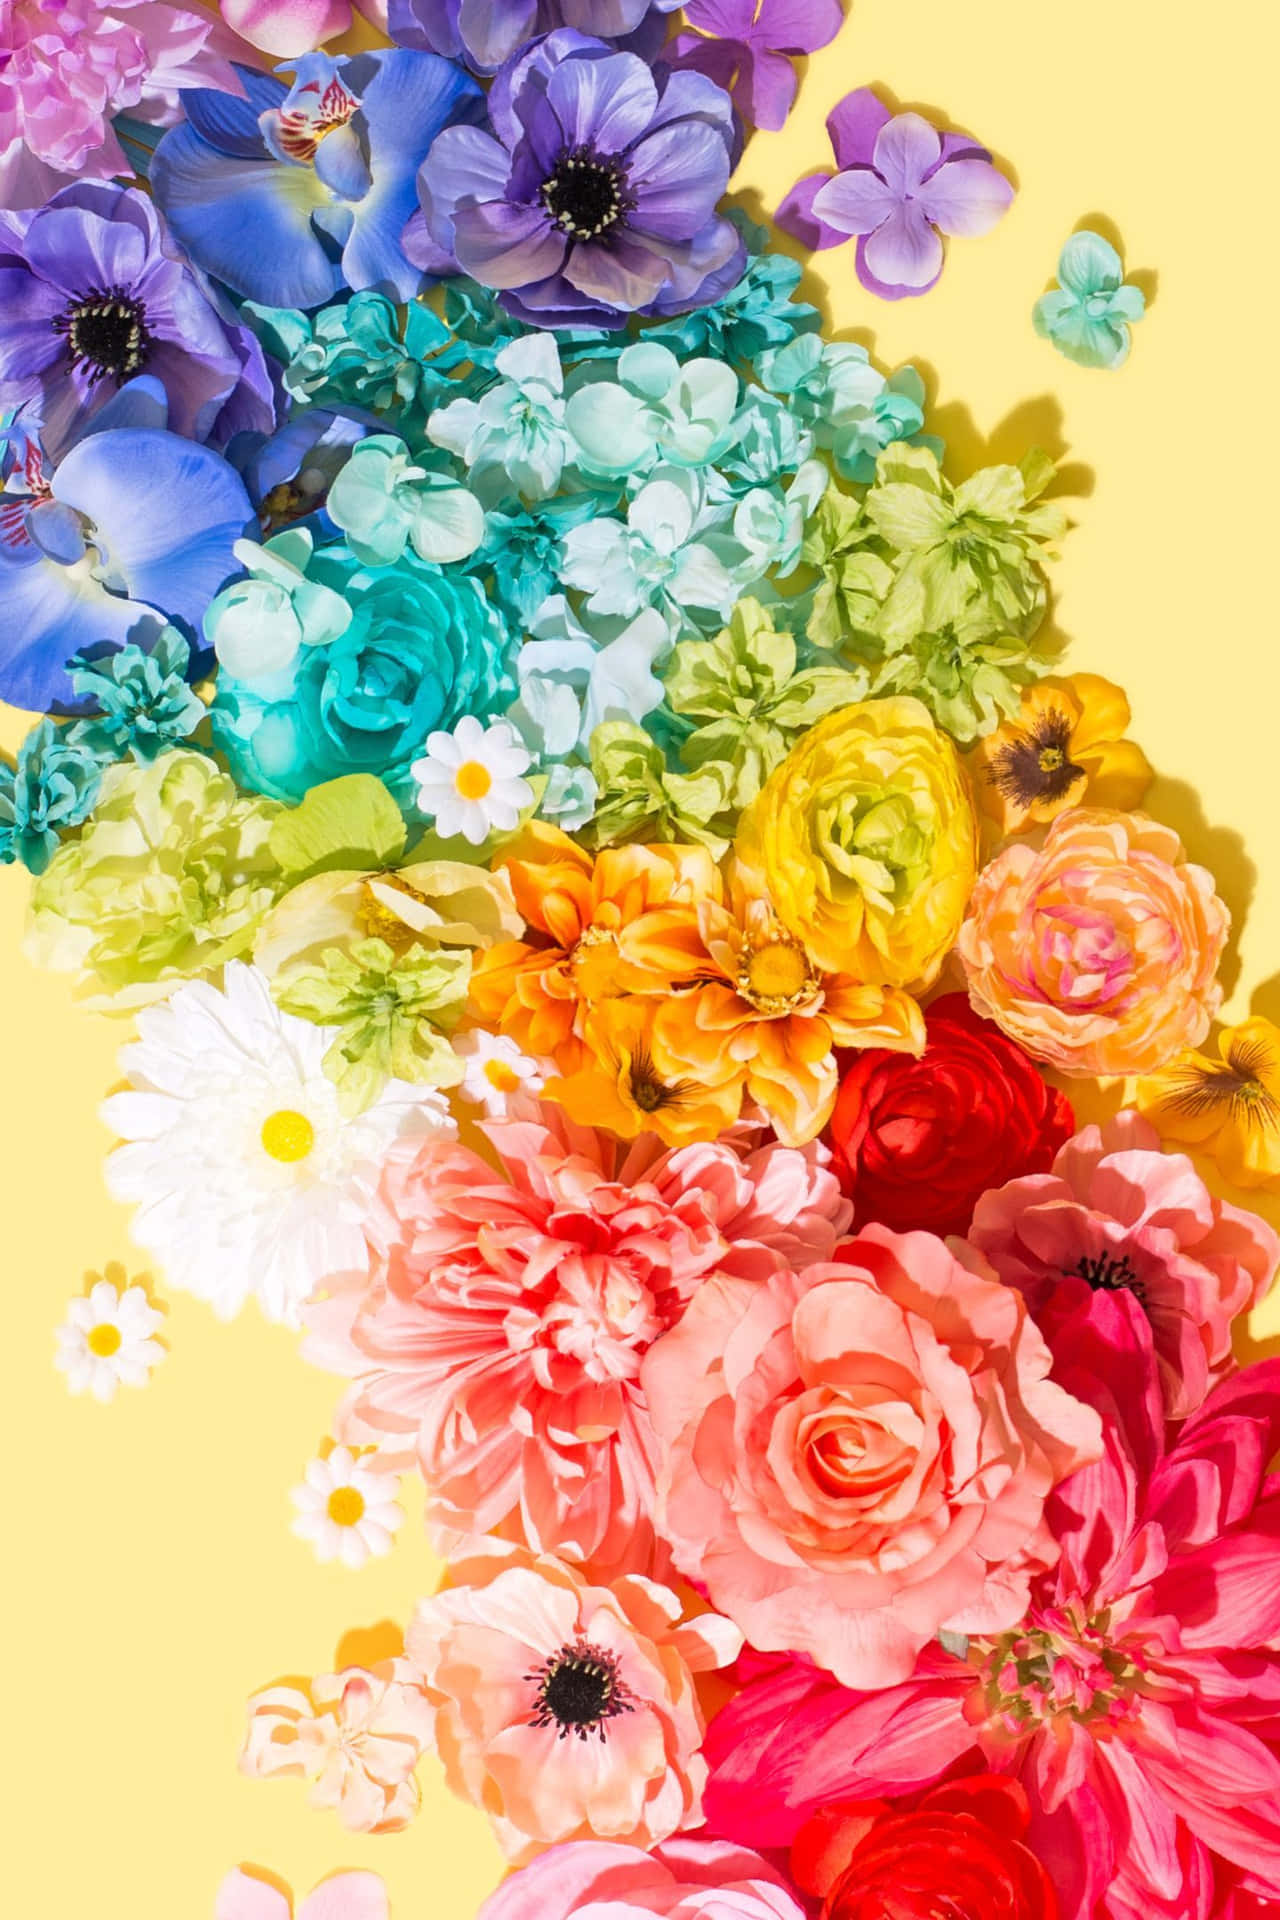 A vivid display of beautiful, colorful flowers perfect for your iPhone. Wallpaper